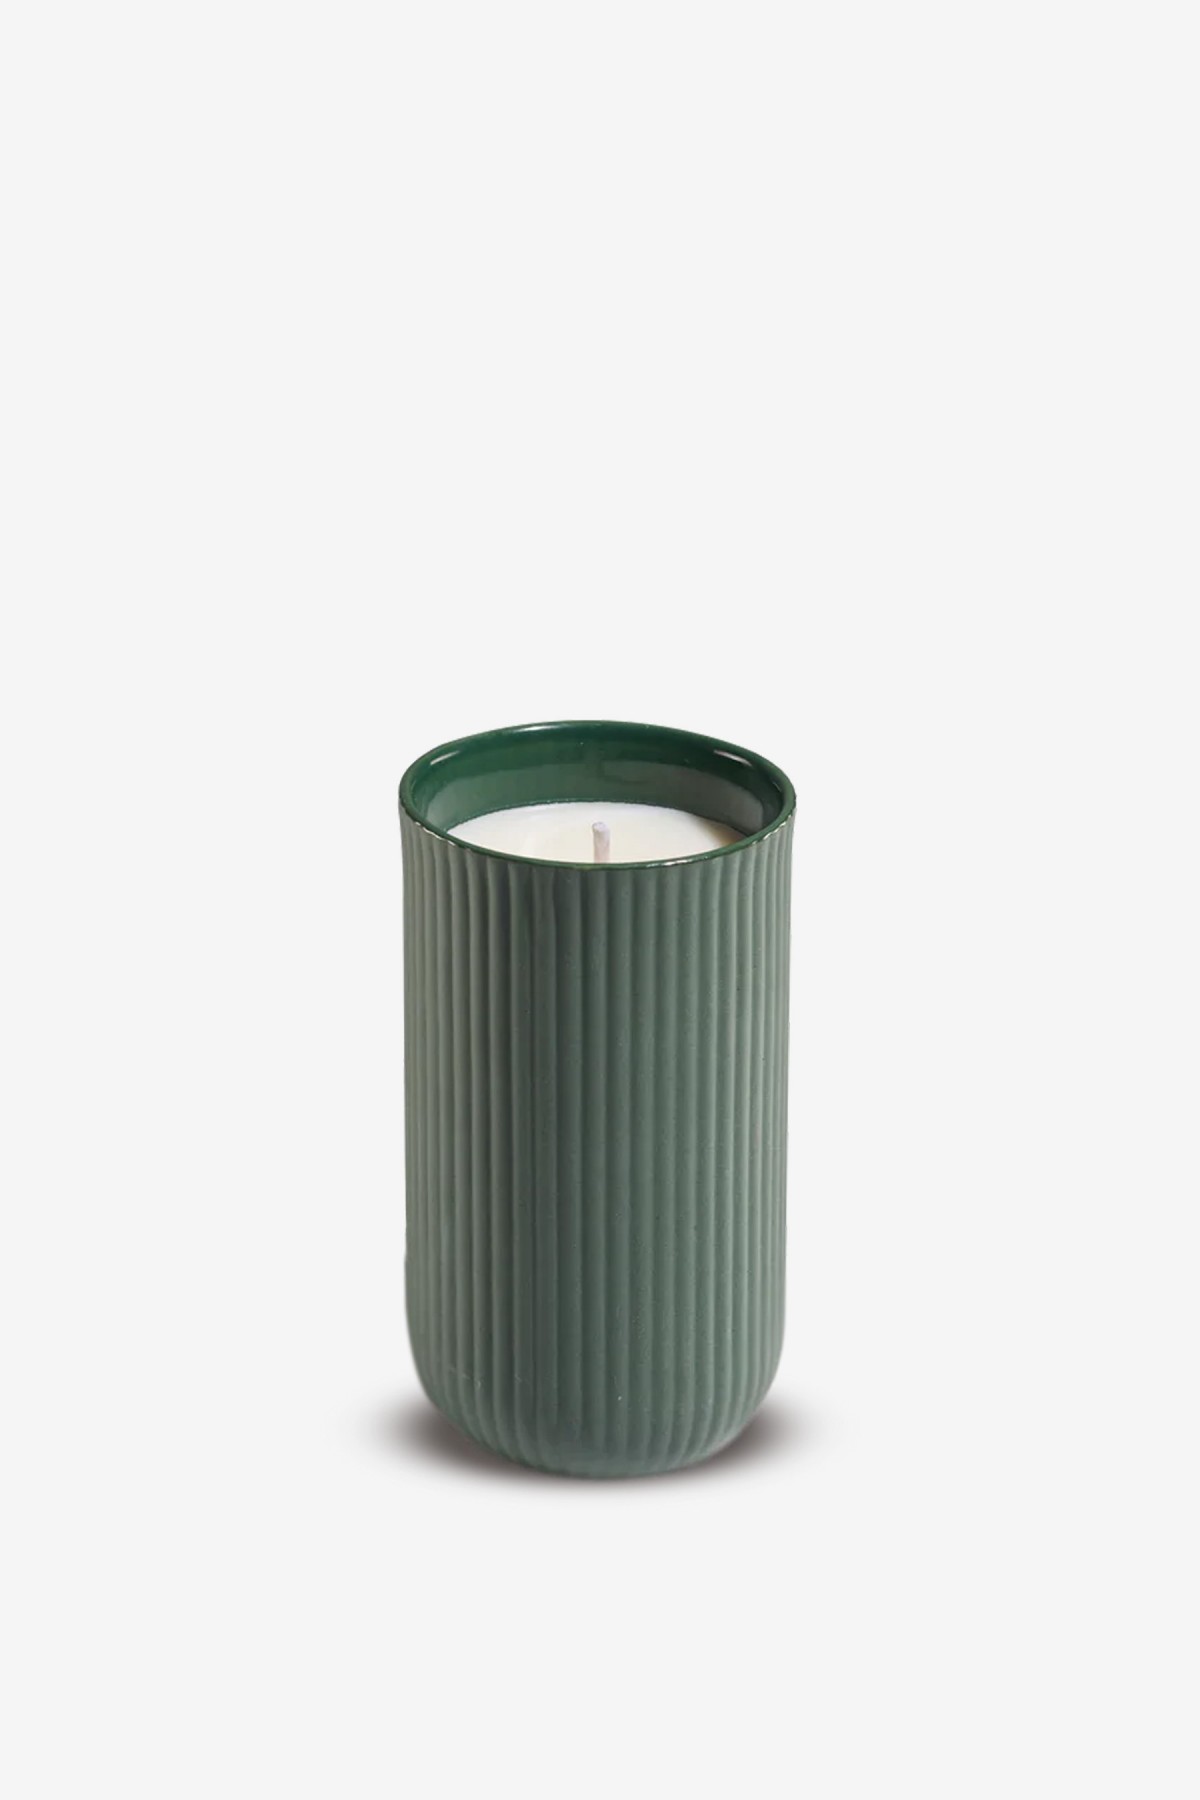 Very Goods Studio Lowtide Collection 250ml Candle in Alga